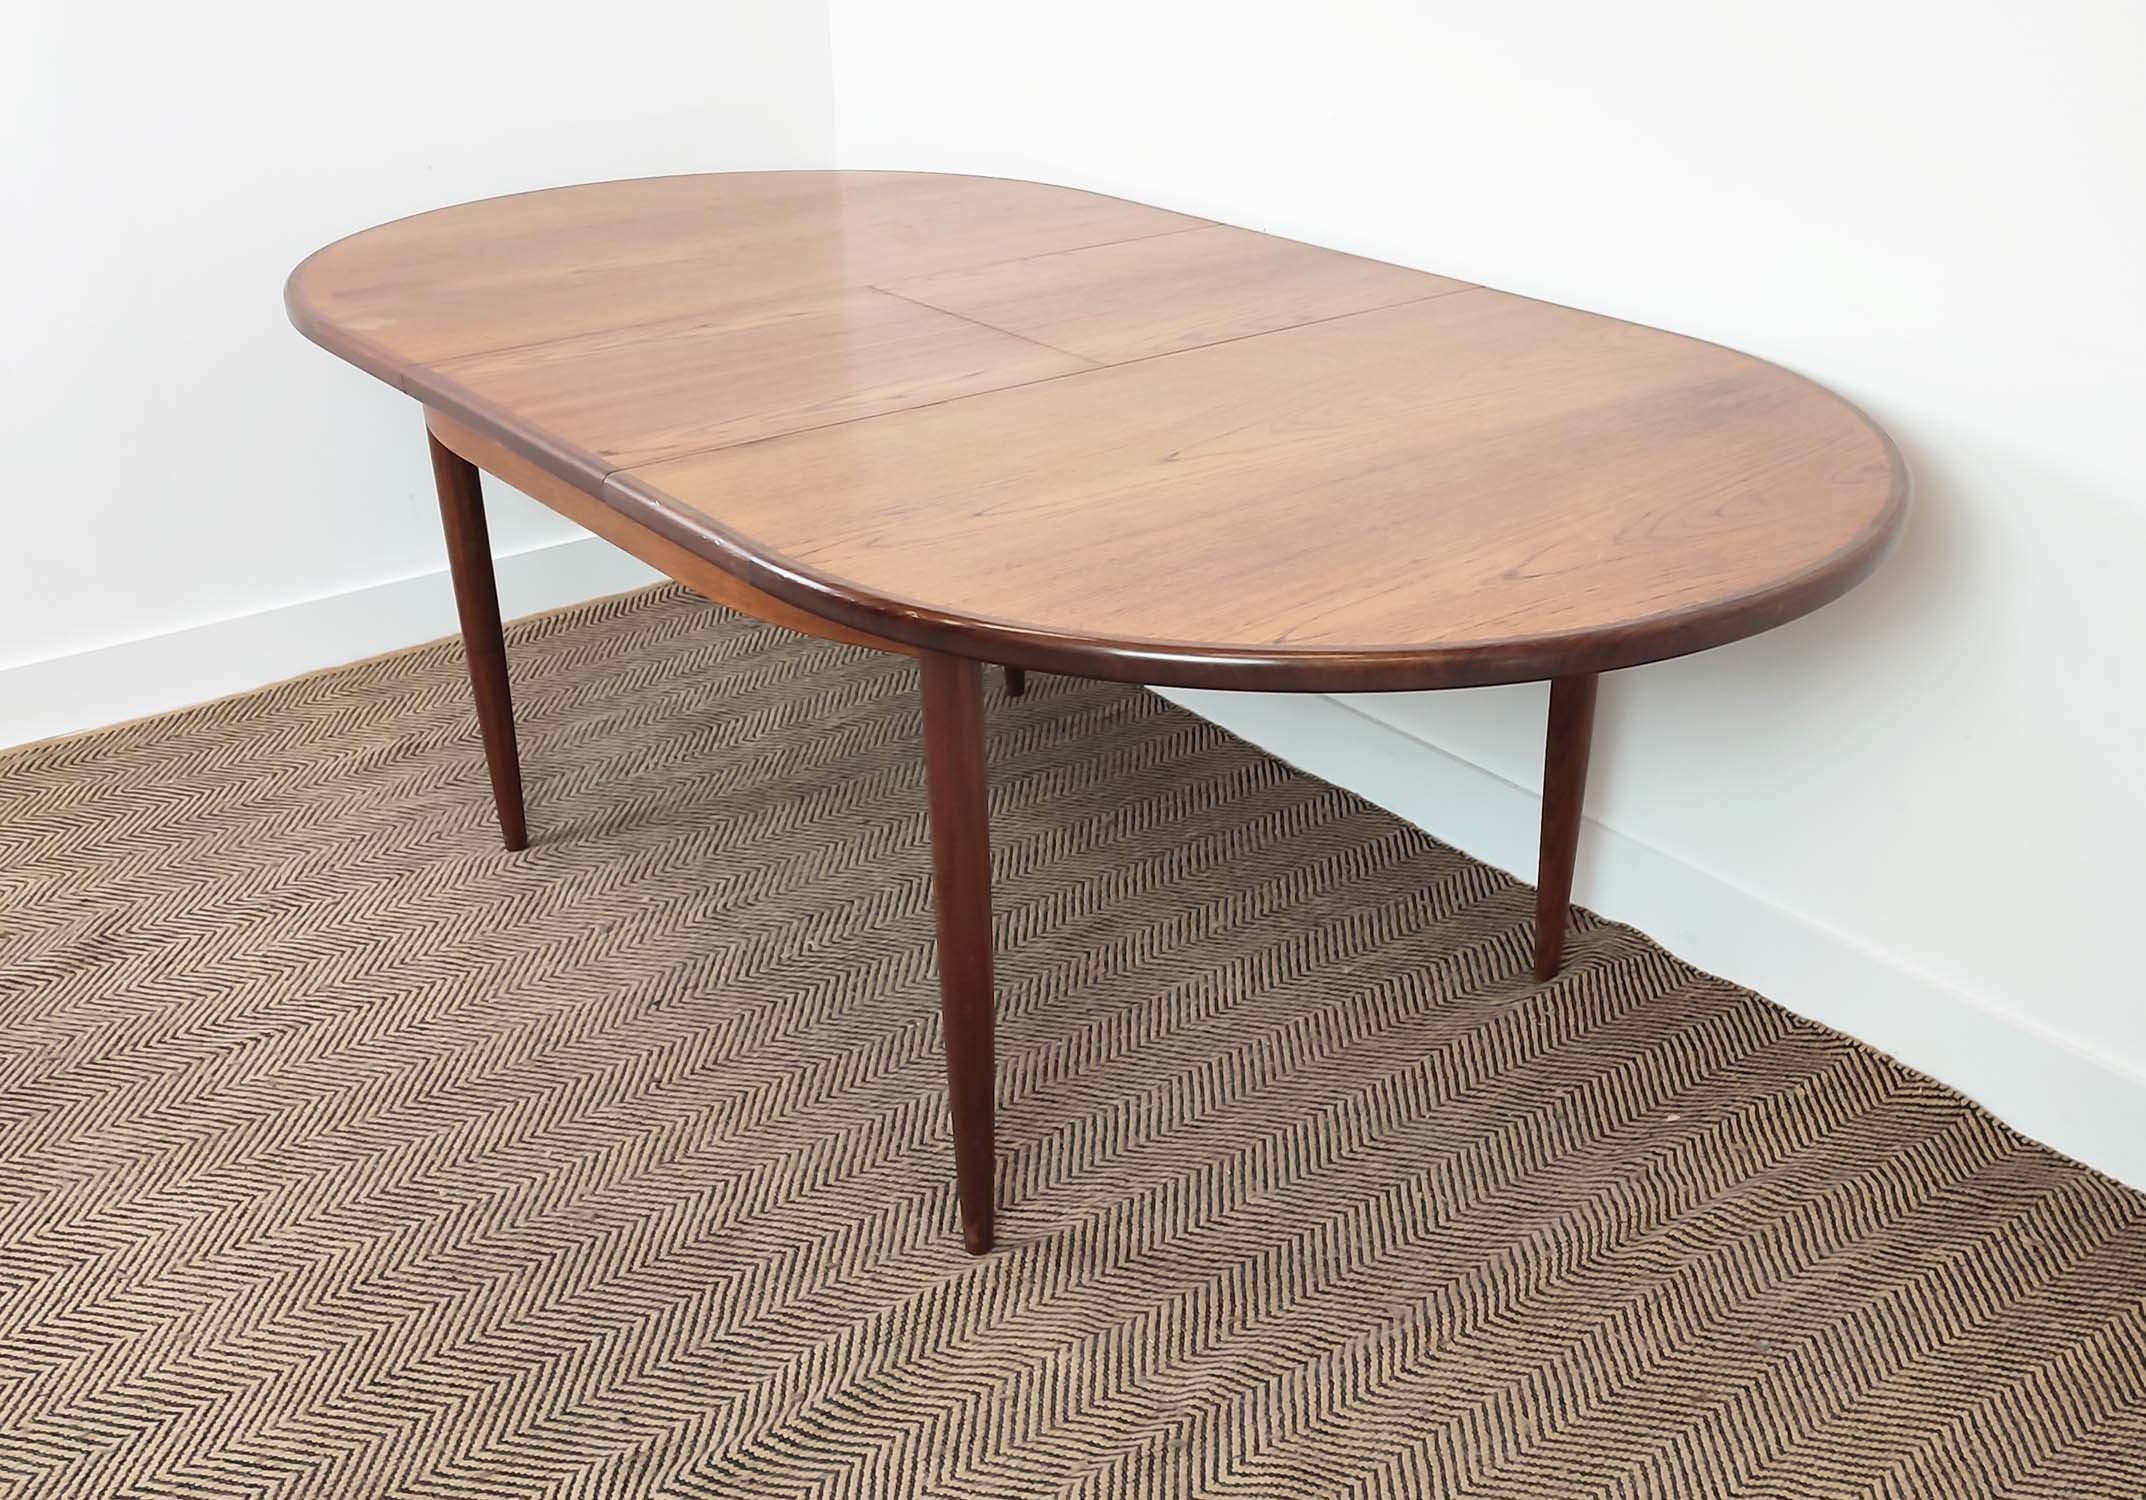 G PLAN DINING TABLE, extendable design, 209cm x 11cm x 73cm at largest. - Image 3 of 12